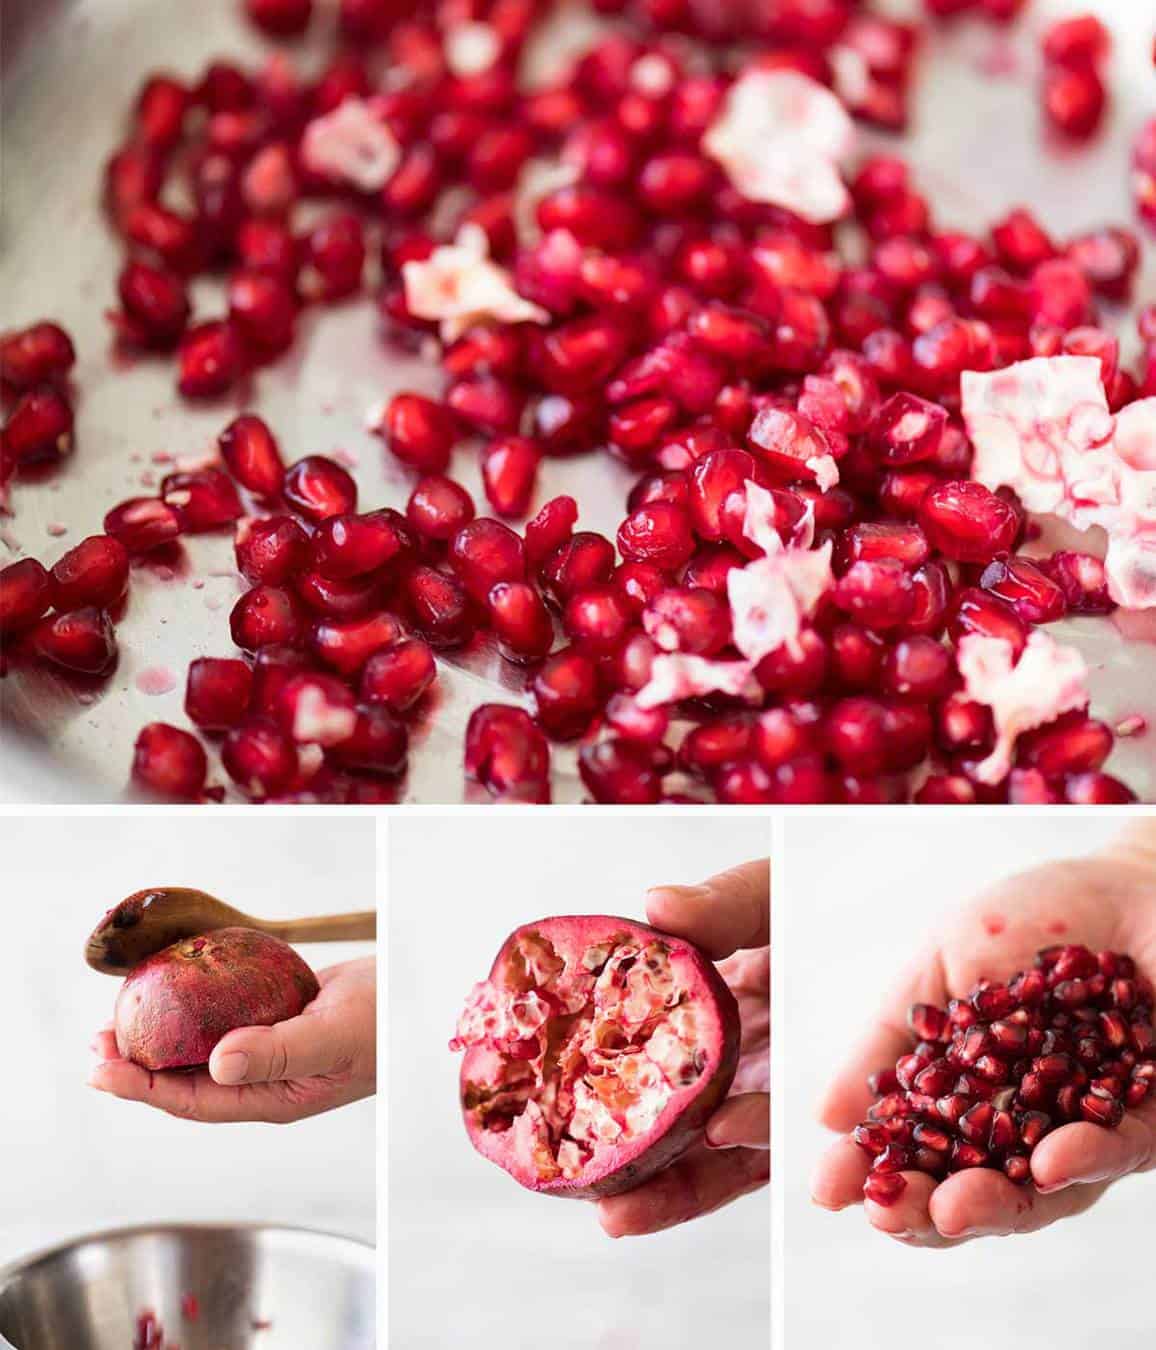 How to remove pomegranate seeds - spank it with a wooden spoon! www.recipetineats.com